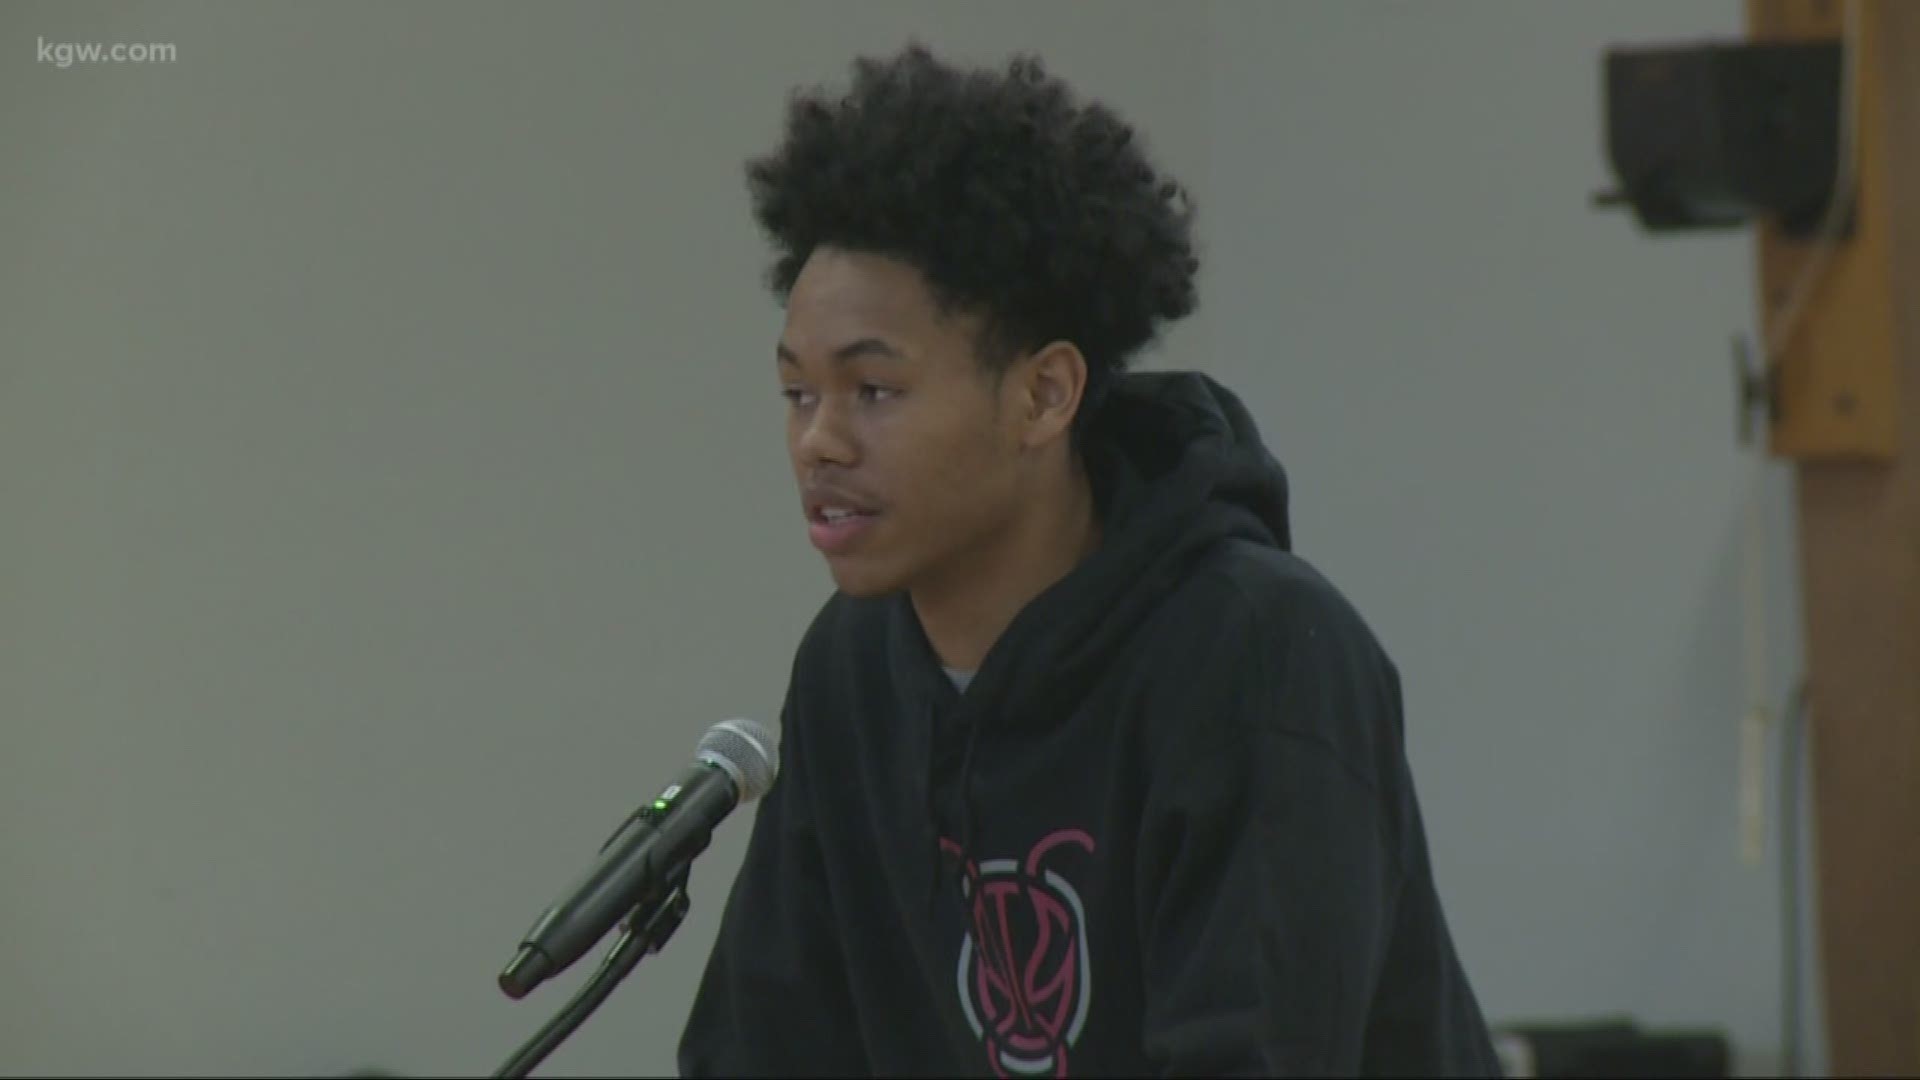 Anfernee Simons helps dedicate a new "upgraded gym" in northeast Portland.